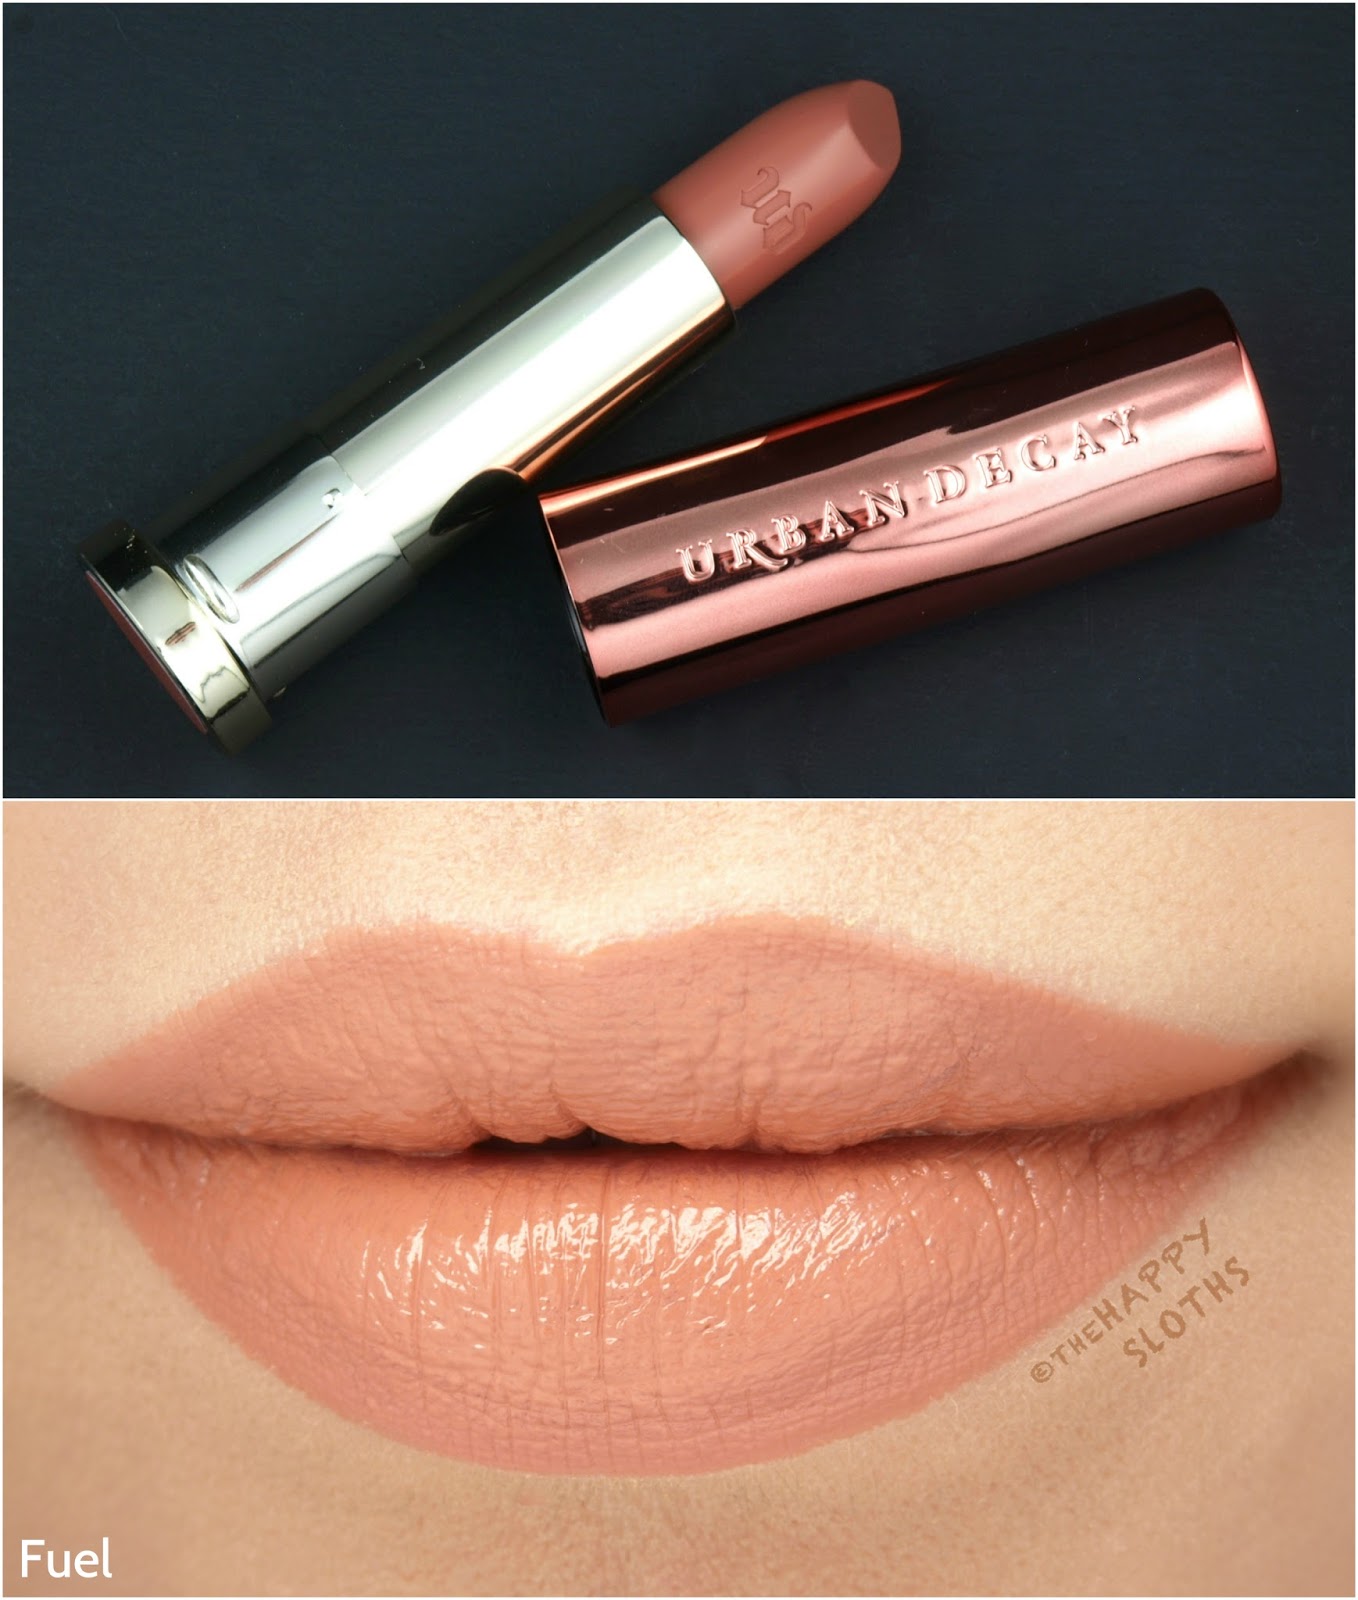 Urban Decay Naked Heat Vice Lipstick in "Fuel": Review and Swatches